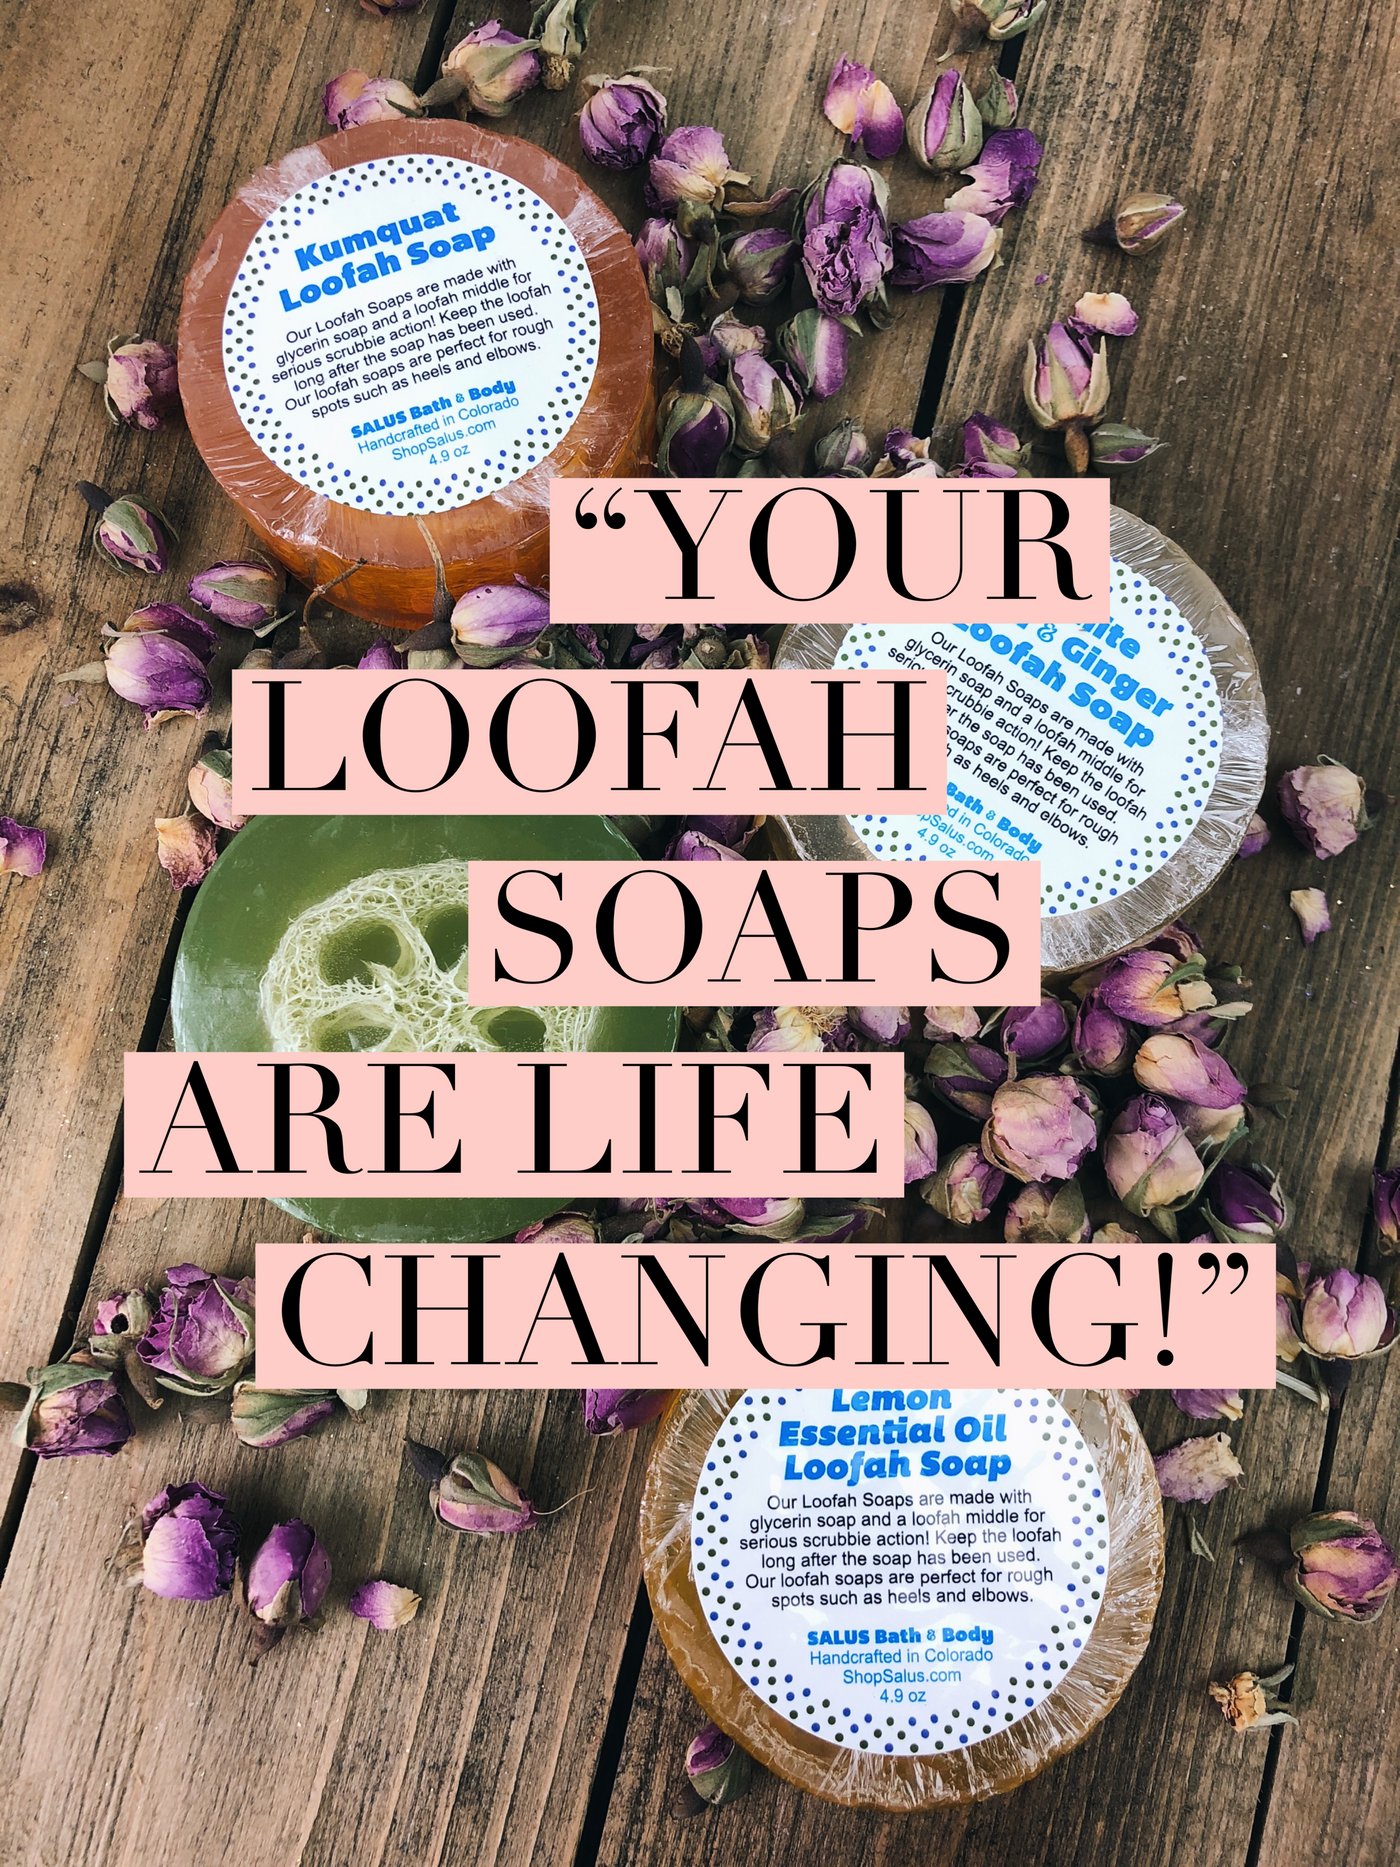 A letter to the soap maker - "MIRACLE SOAP"